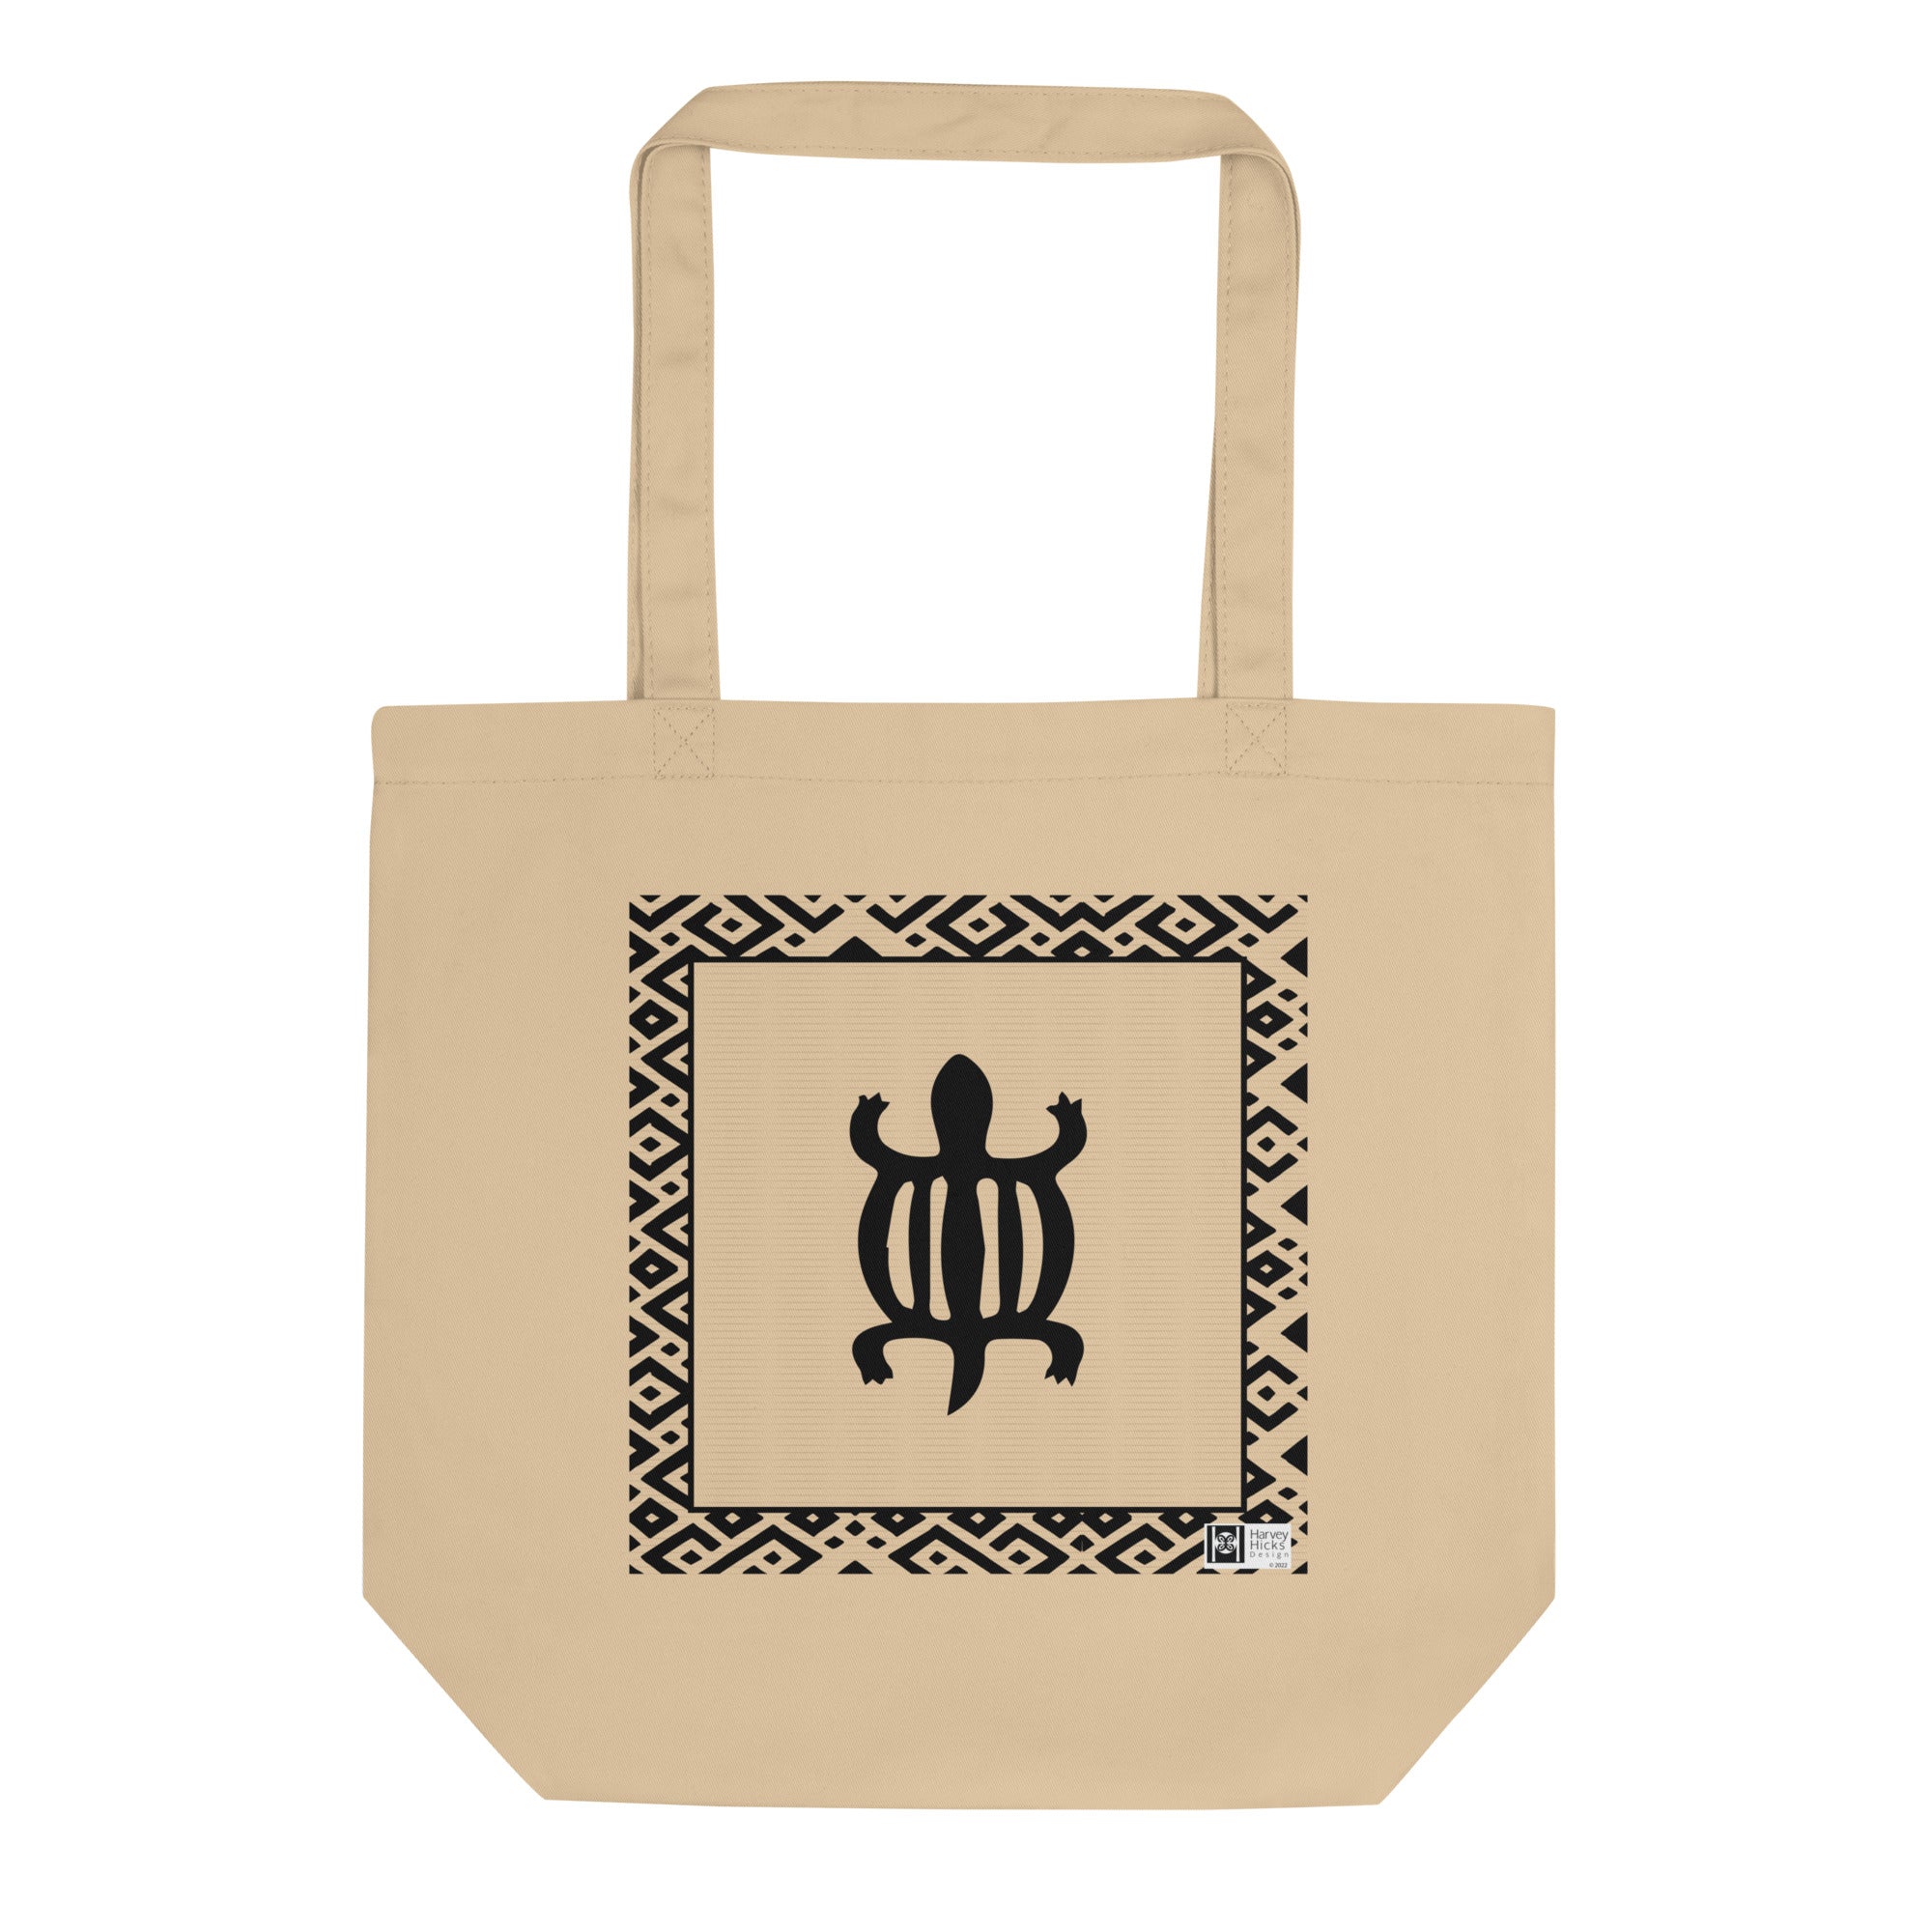 100% cotton Eco Tote Bag, featuring the Adinkra symbol for adaptability, NO TEXT